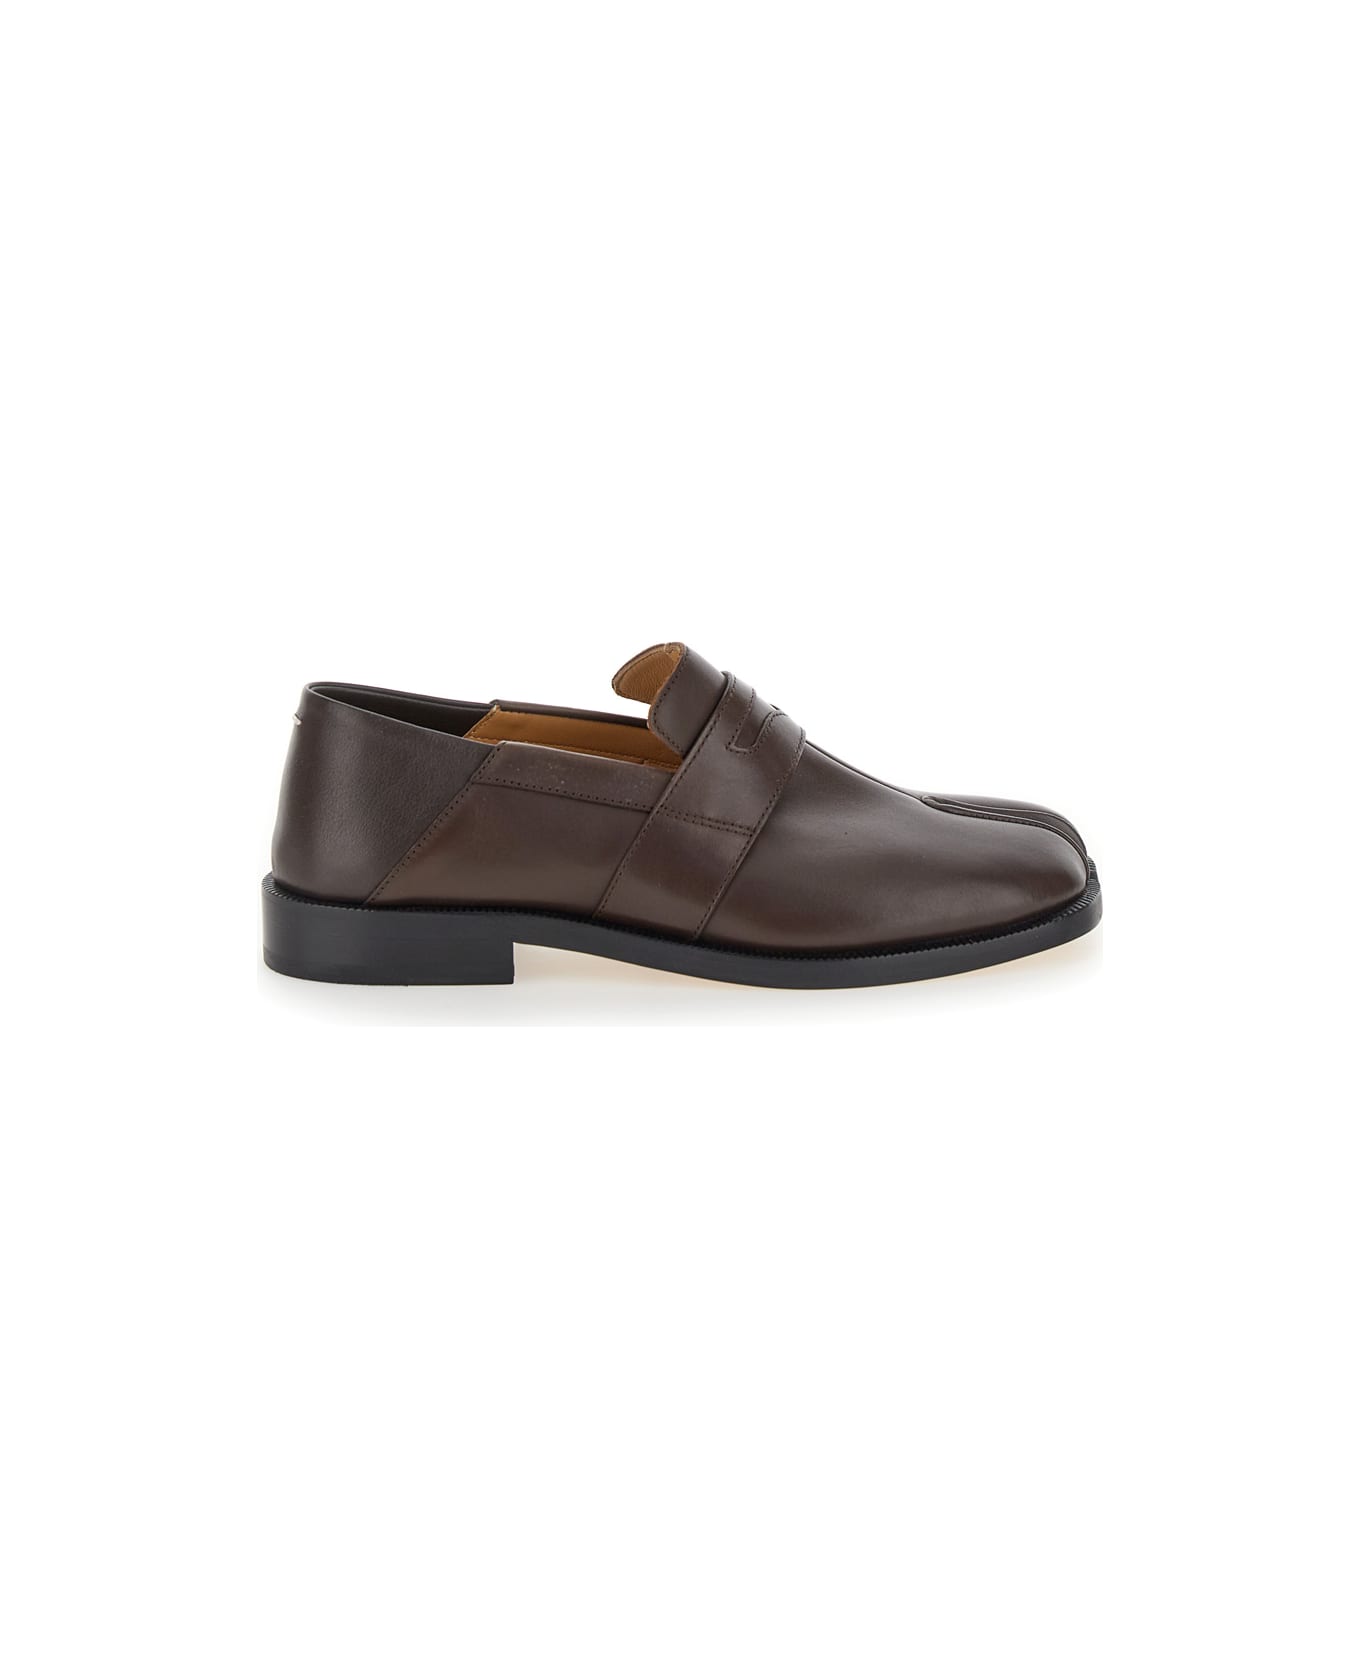 Maison Margiela 'tabi' Loafer In Leather Woman - Brown